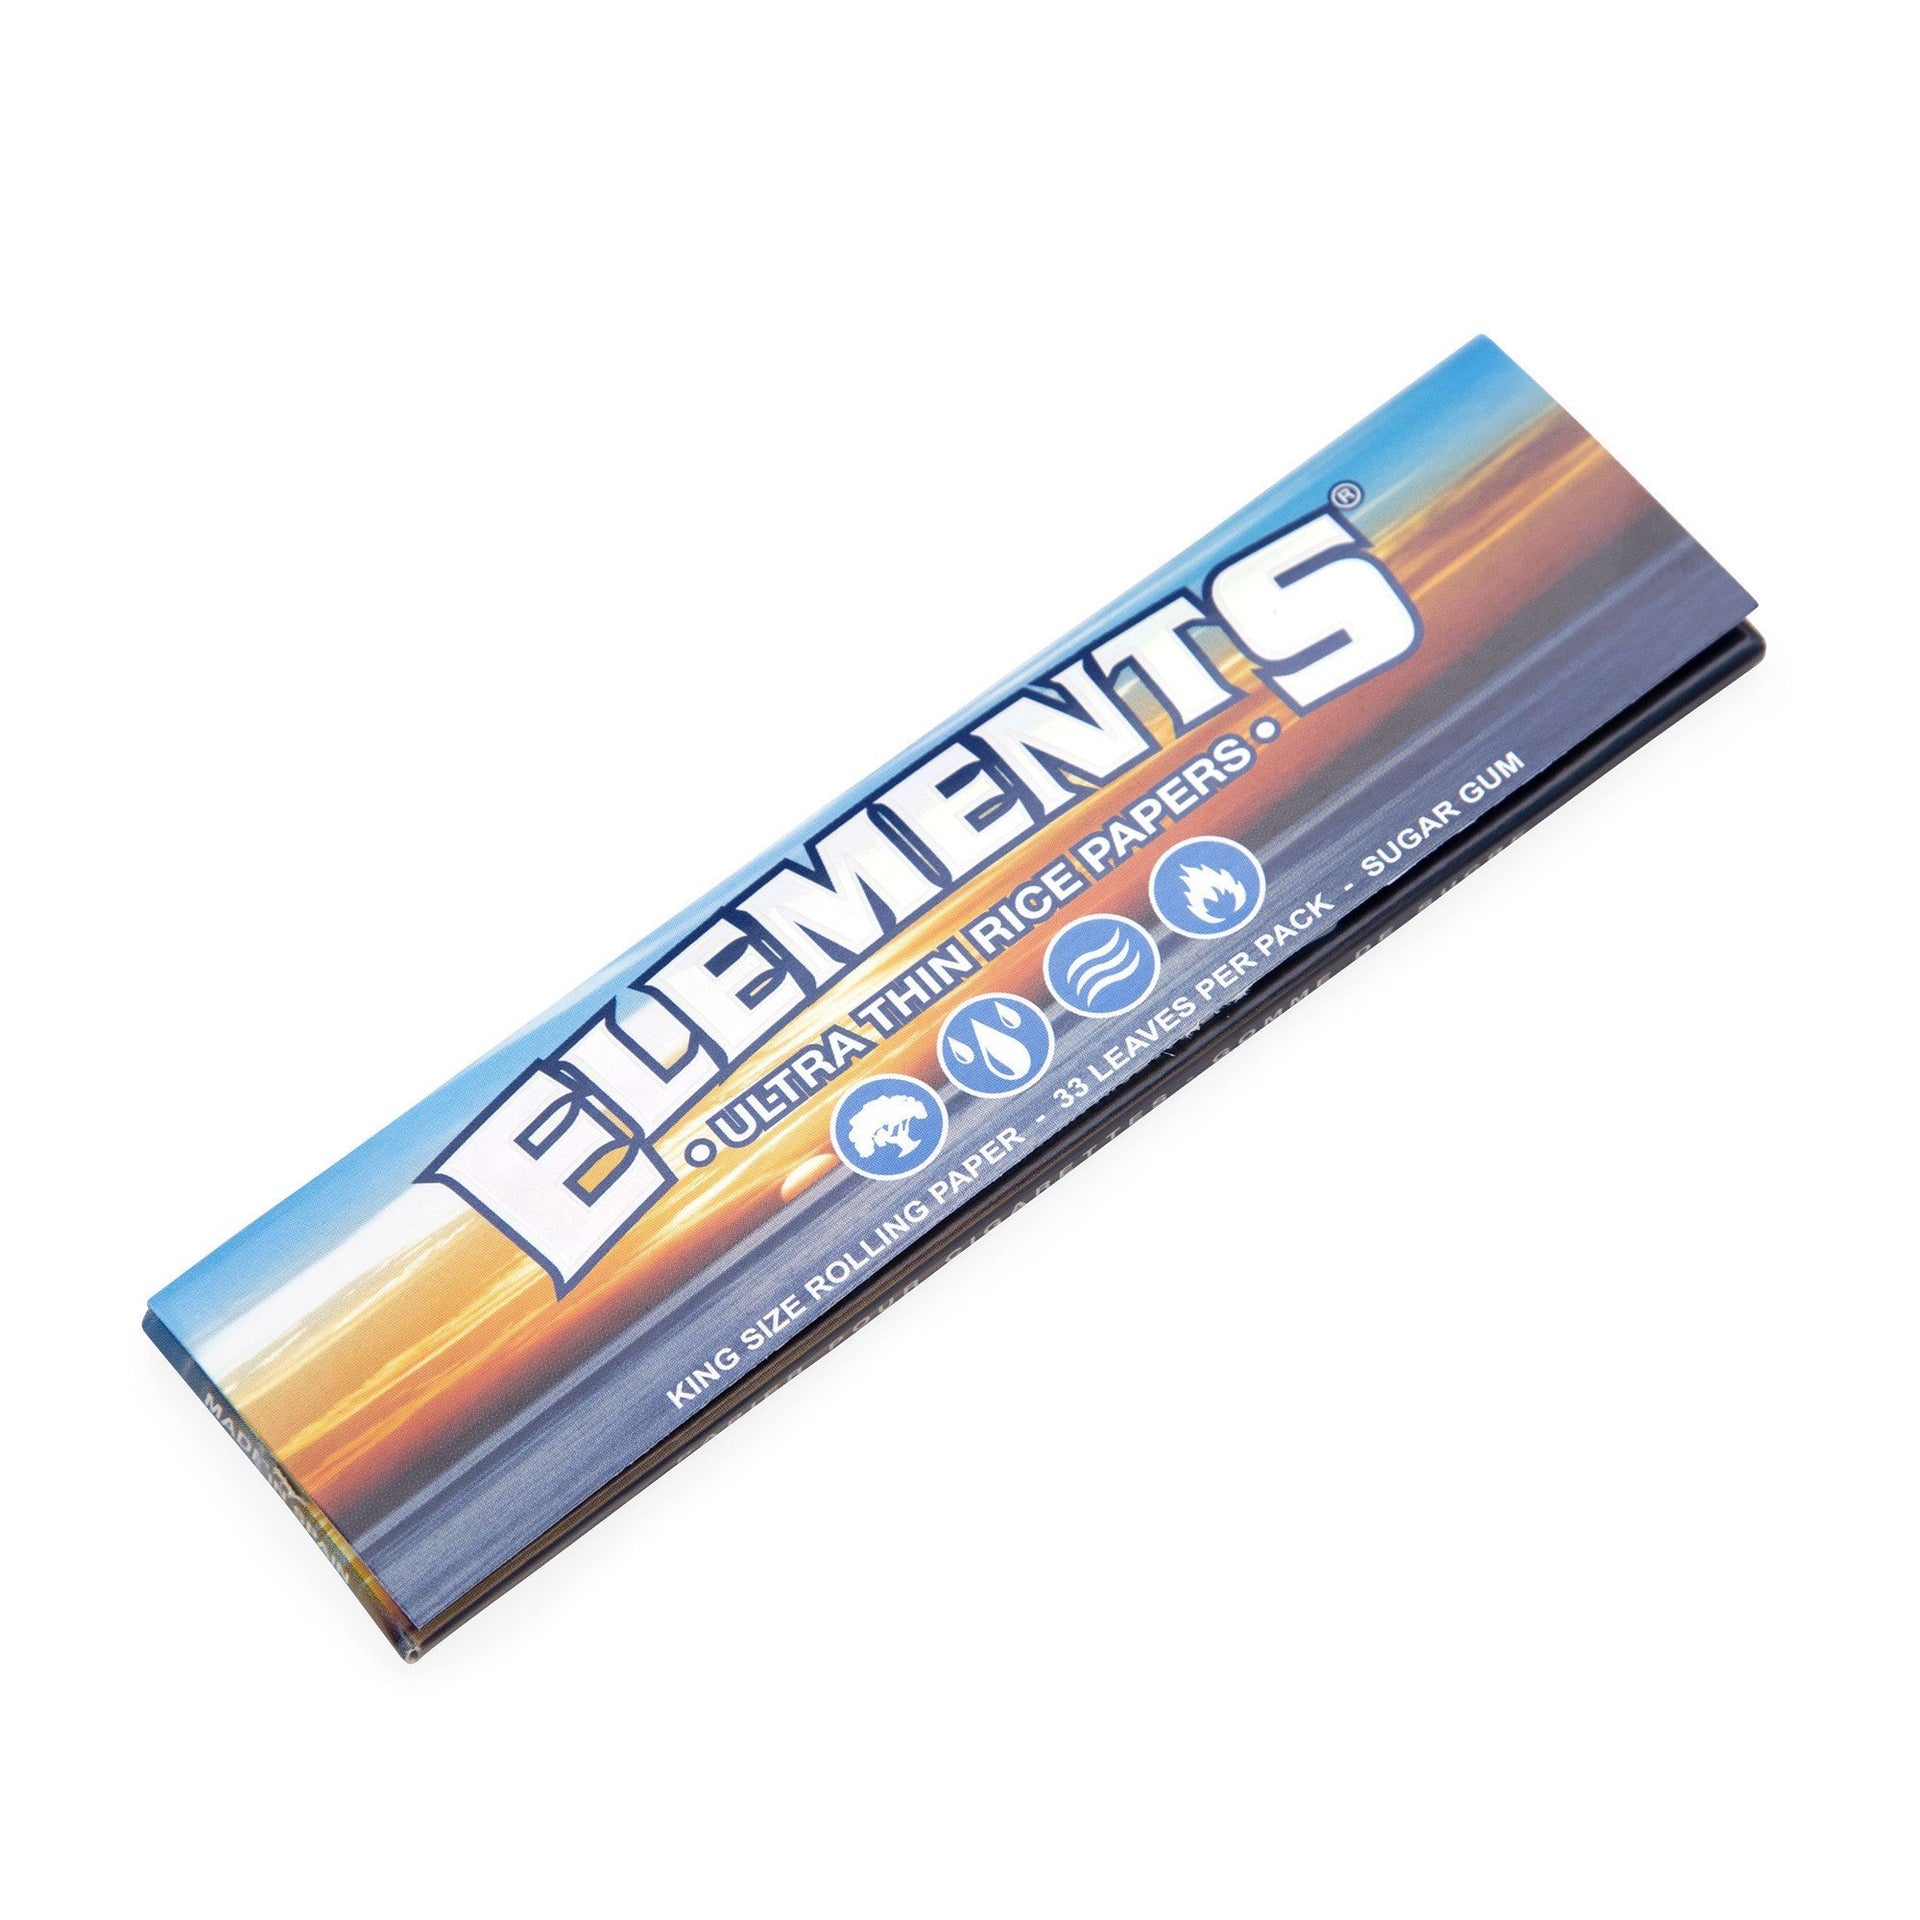 Elements 1 1/4in Rolling Papers / $ 1.99 at 420 Science